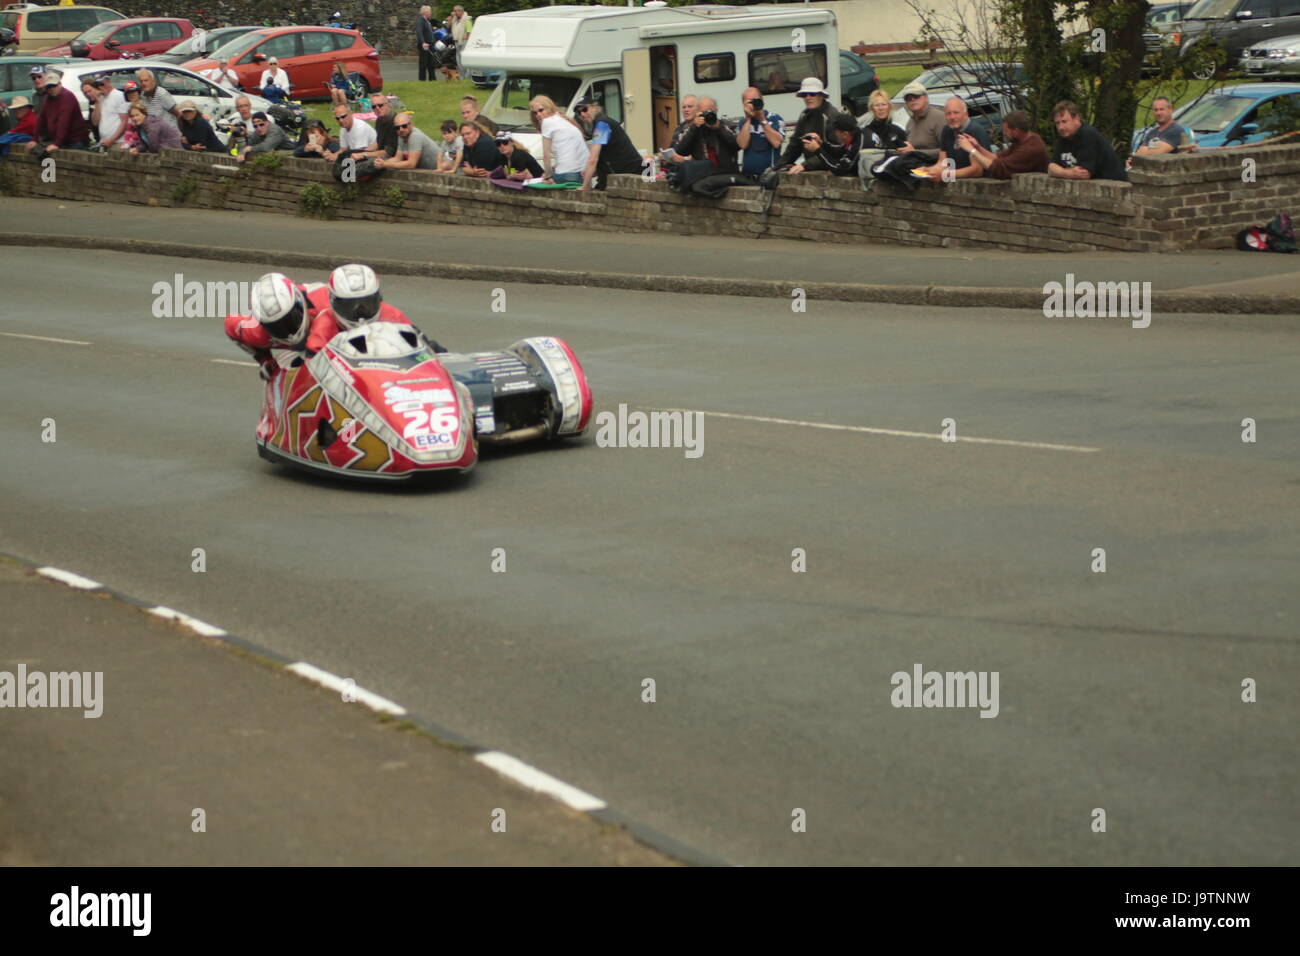 Isle of Man TT Races, Sidecar Qualifying Practice Race, Saturday 3 June 2017. Sidecar qualifying session. Number 26, Lewis Blackstock and Patrick Rosney on their 600cc LCR Suzuki of the Dave Holden Racing team from Blackburn, uk . Credit: Eclectic Art and Photography/Alamy Live News. Stock Photo